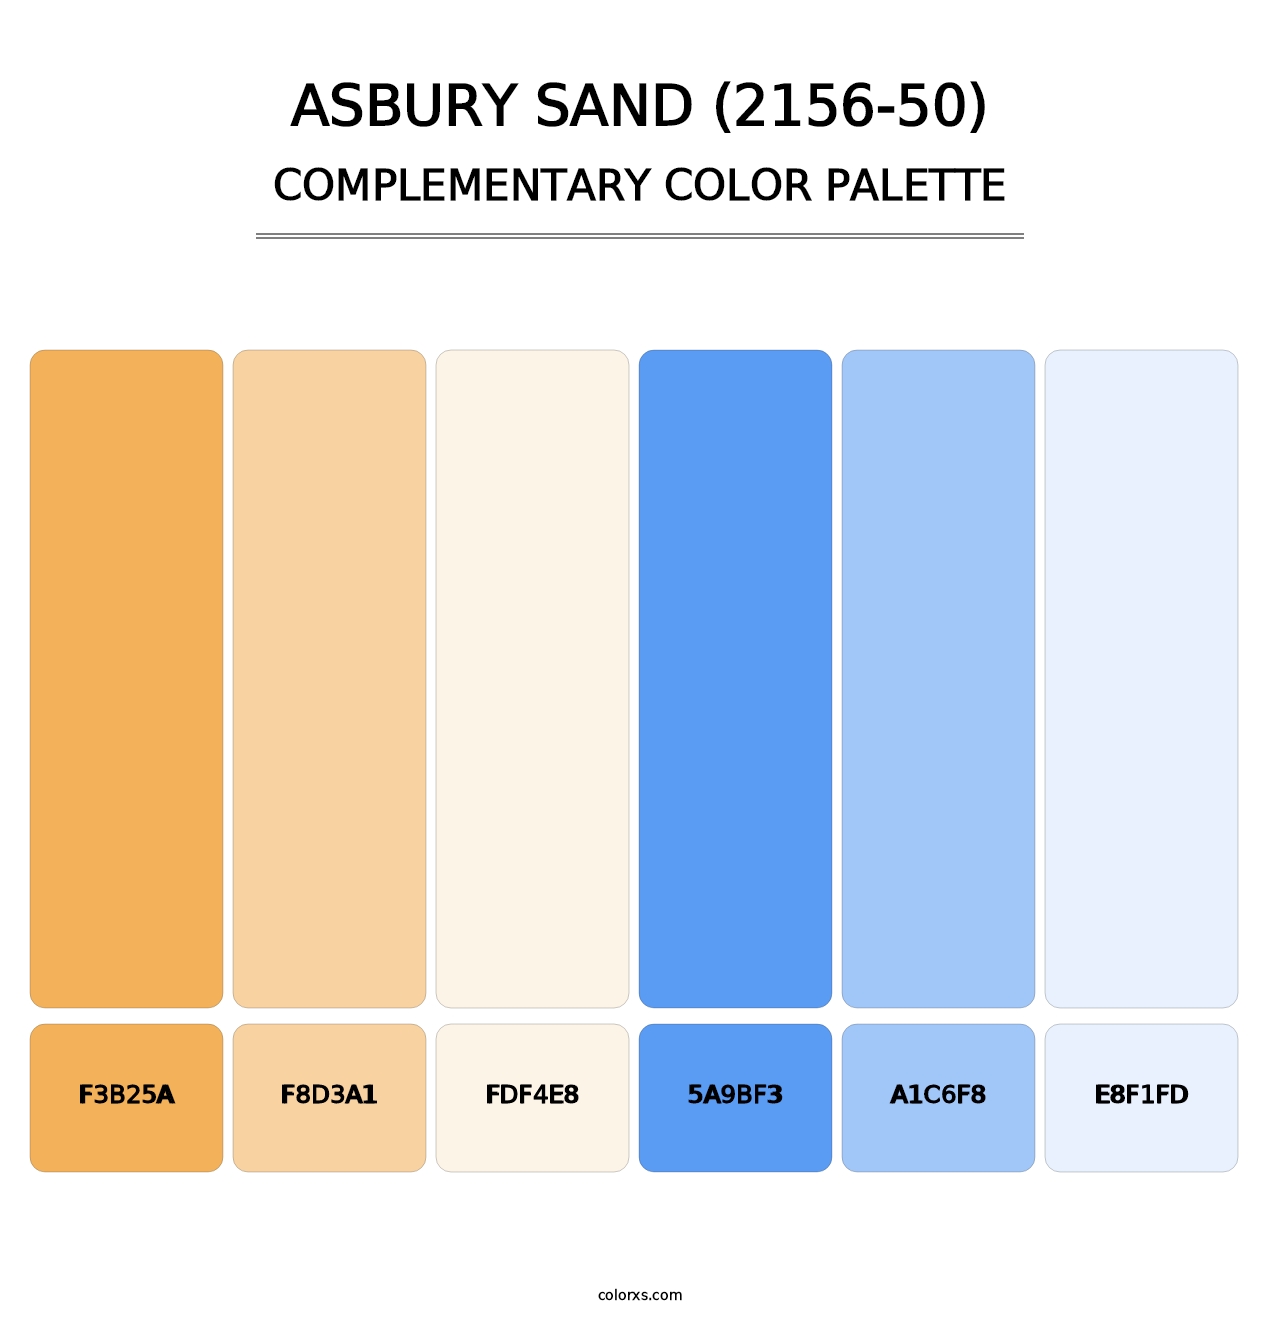 Asbury Sand (2156-50) - Complementary Color Palette